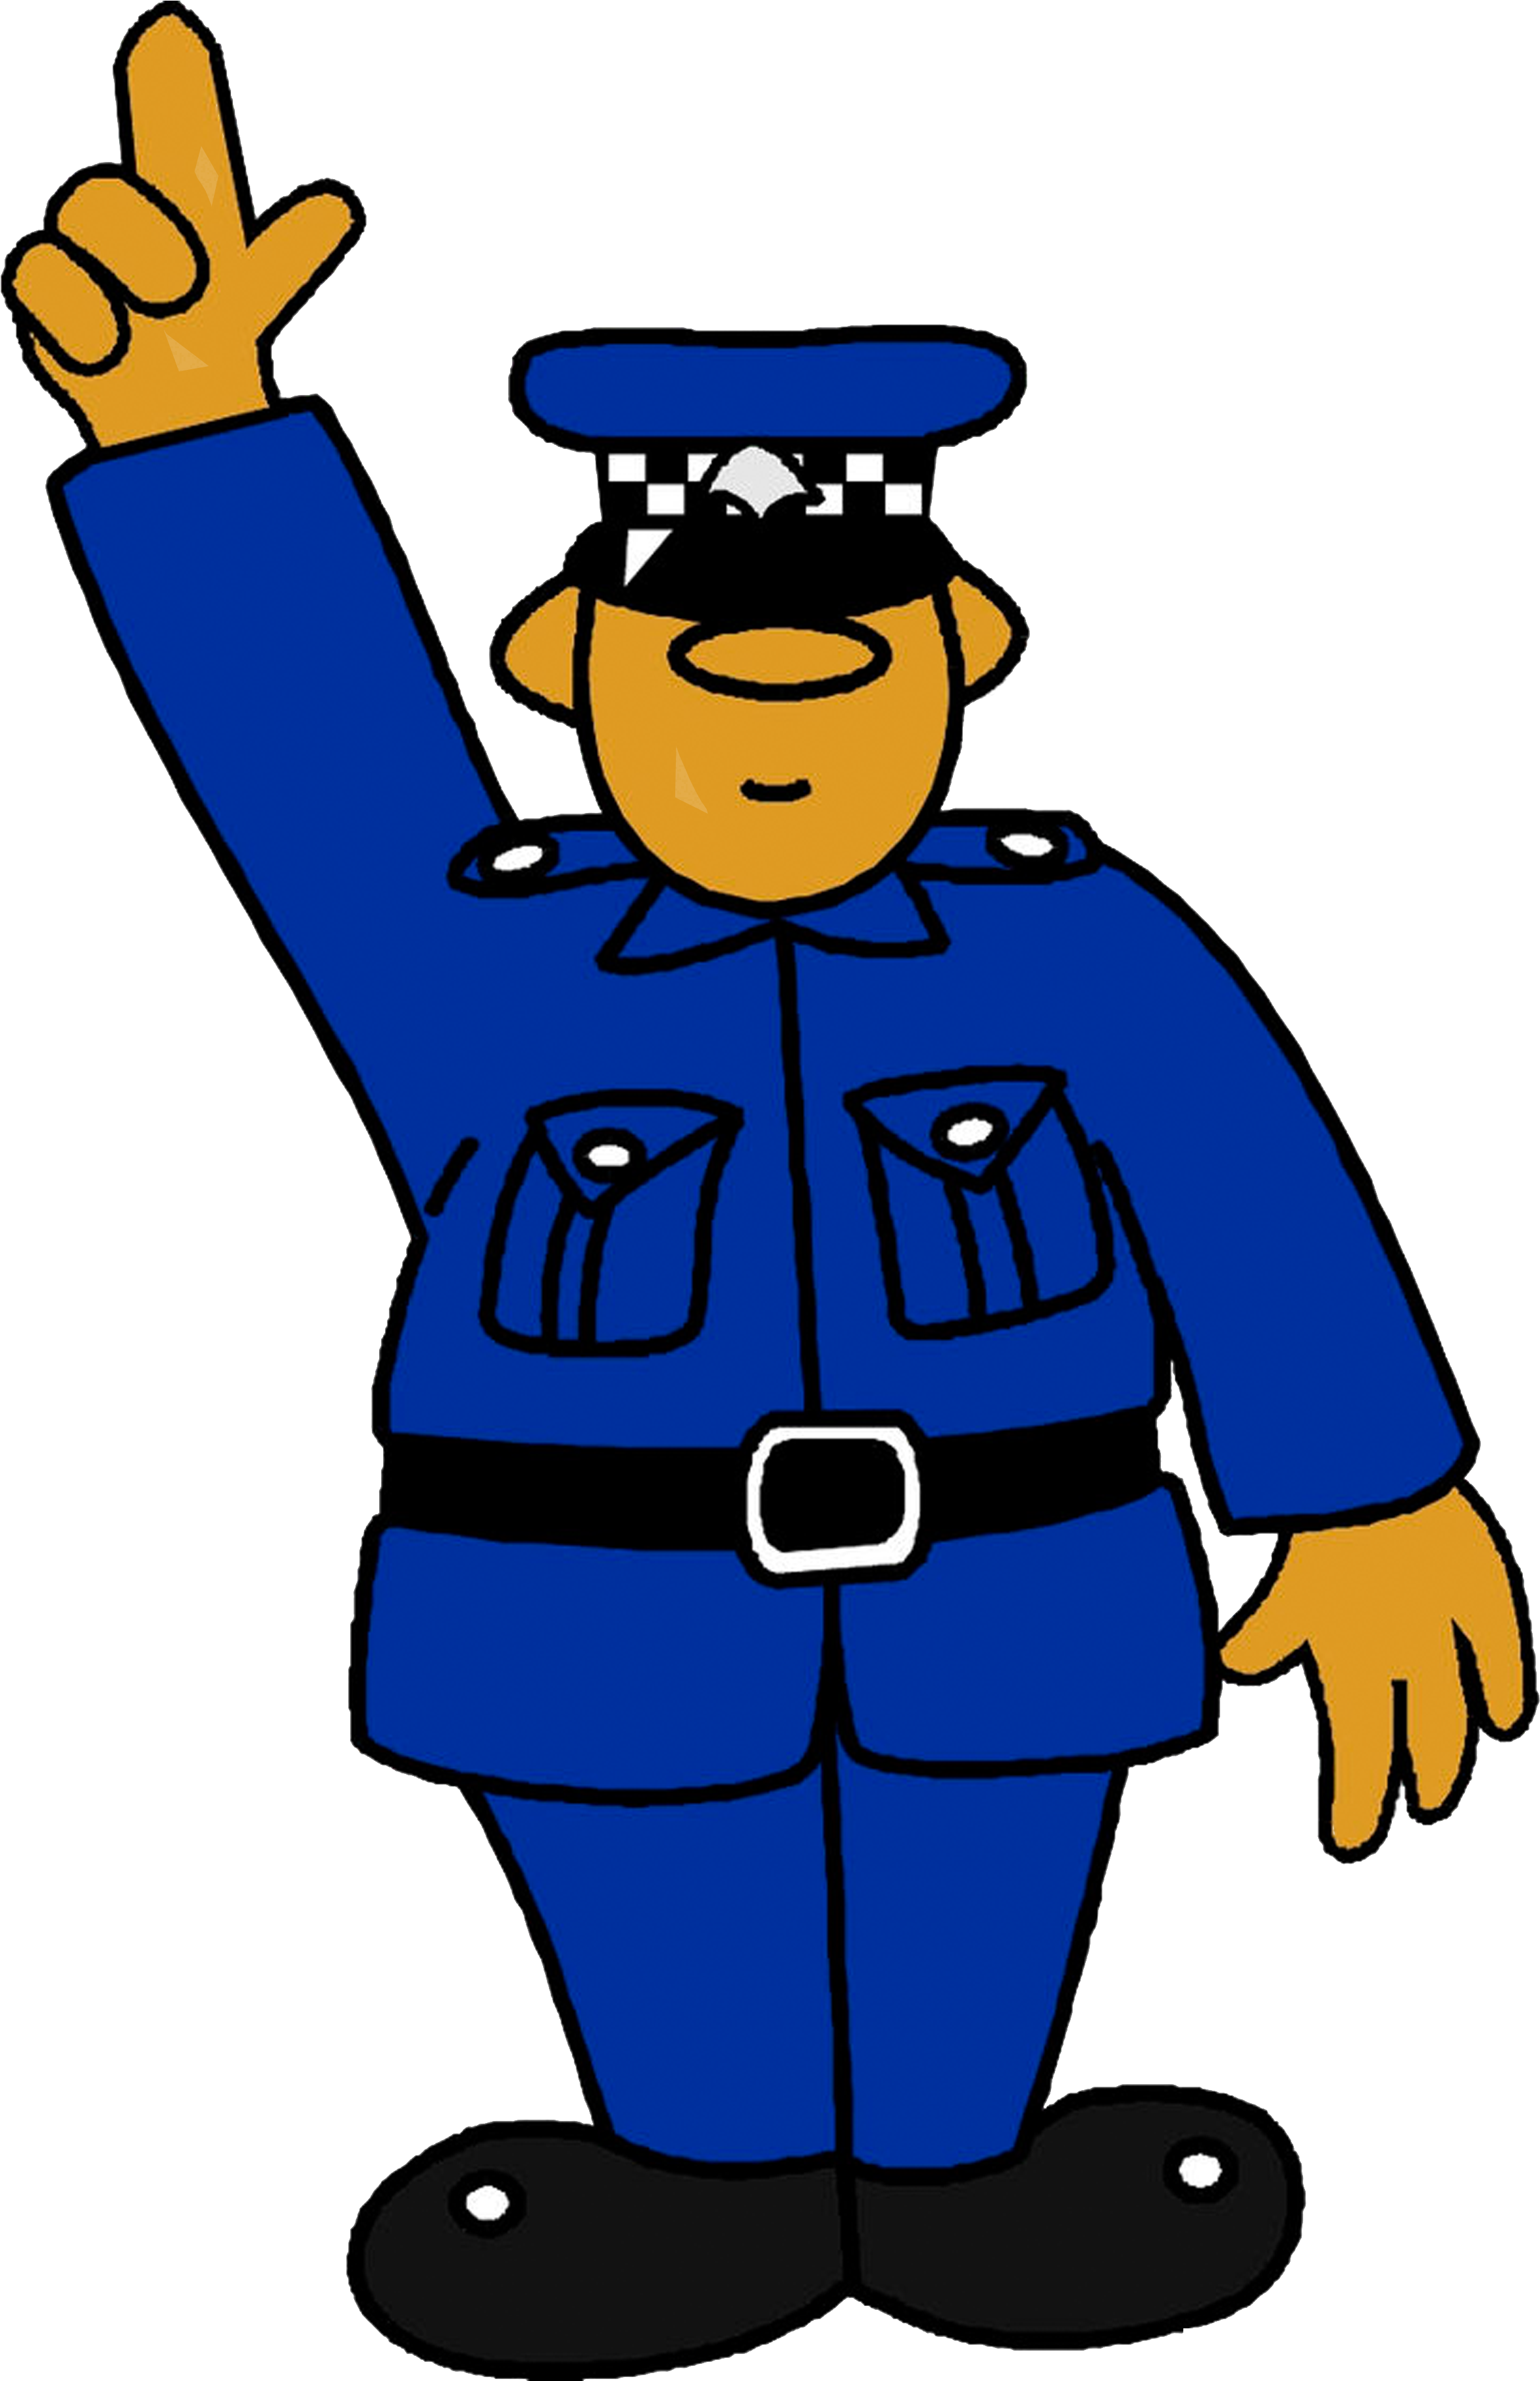 Police Officer Cartoon Traffic Police Clip Art - Cartoon Police Officer -  (5000x5000) Png Clipart Download